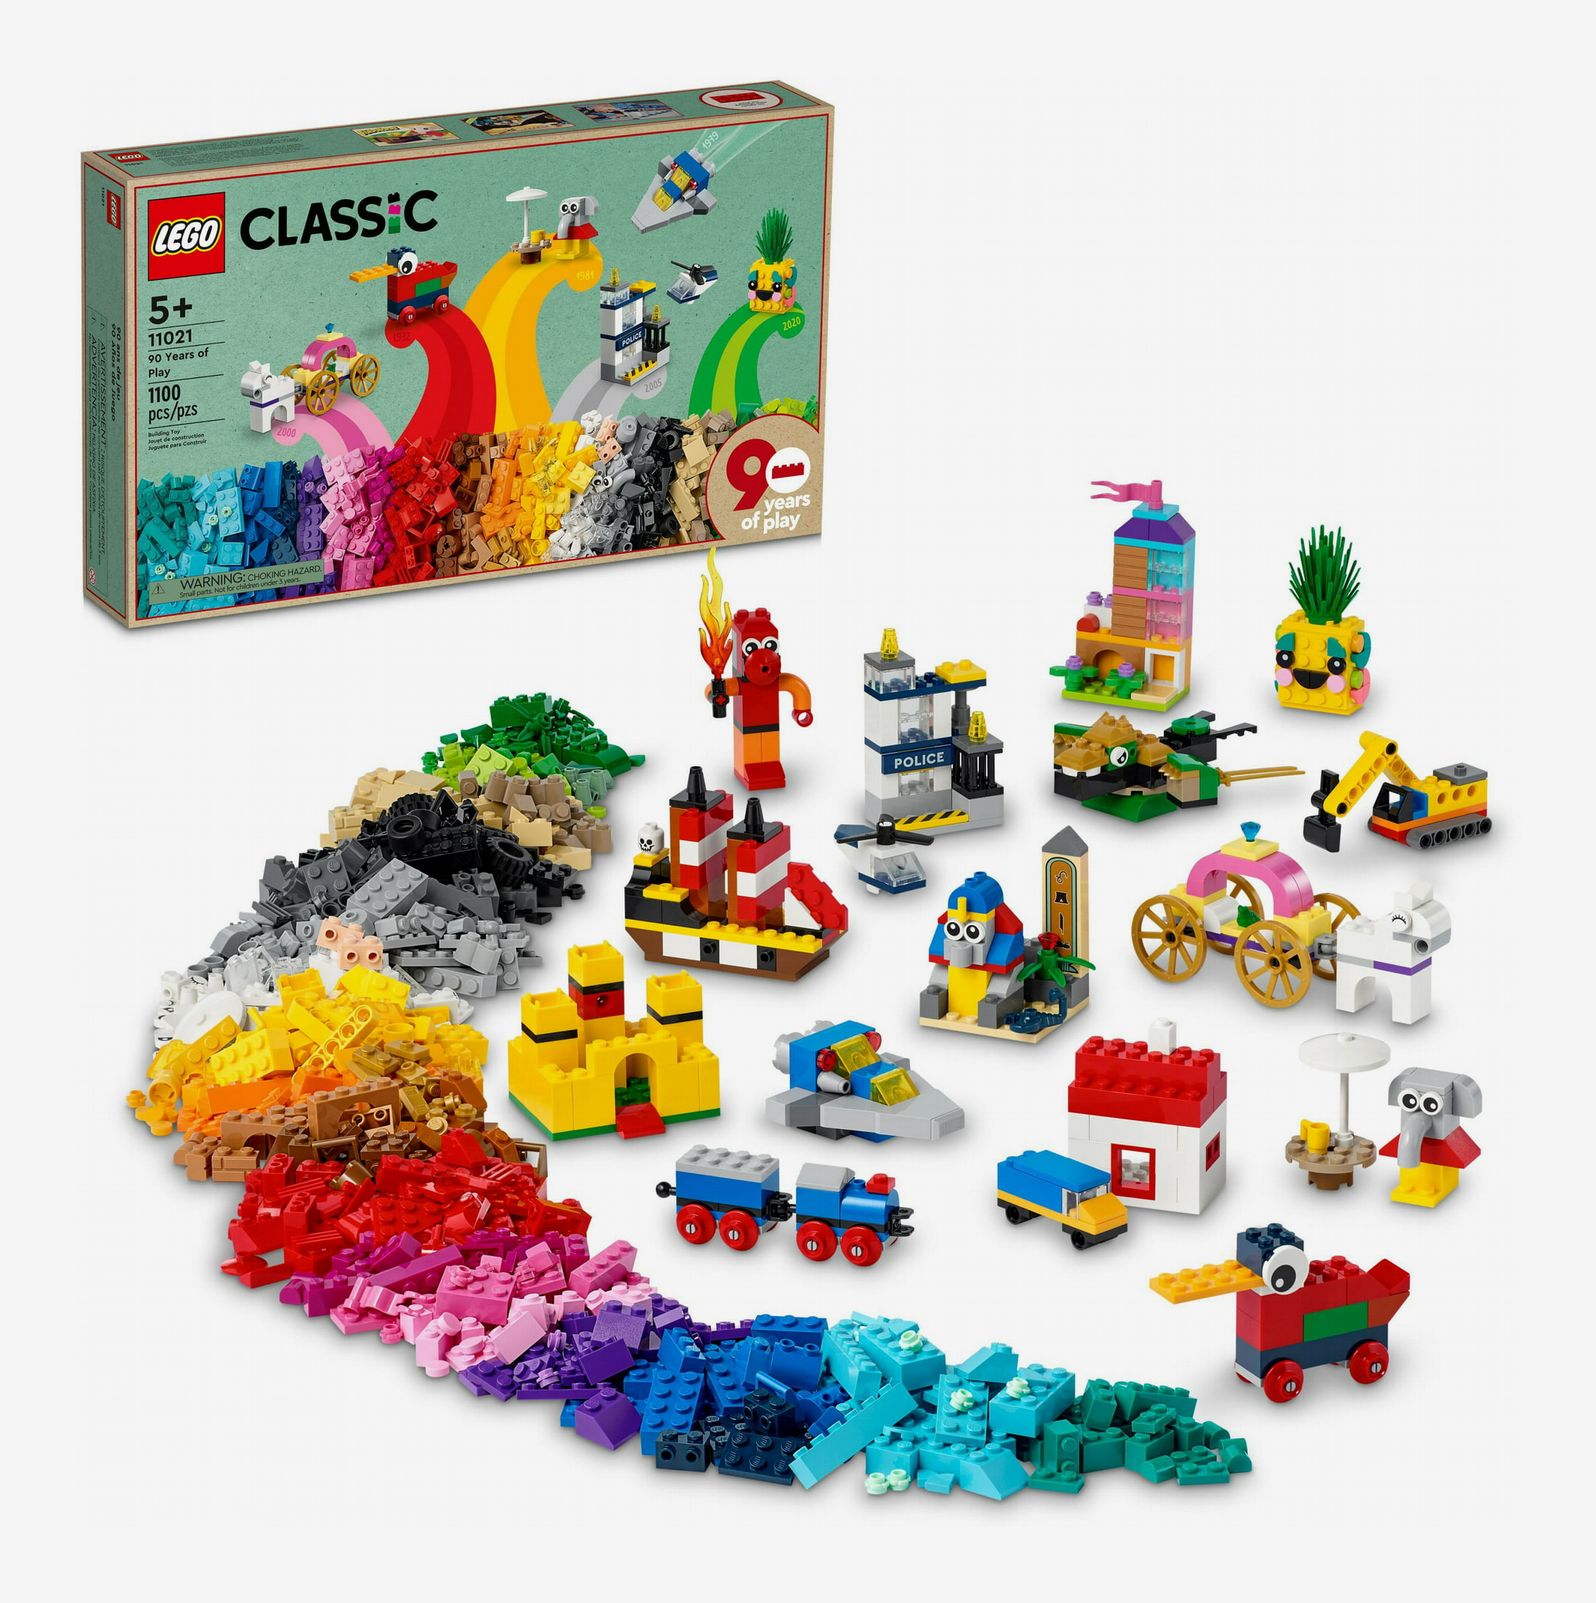 This 1,000-Piece Lego Set Is Just Today | The Strategist